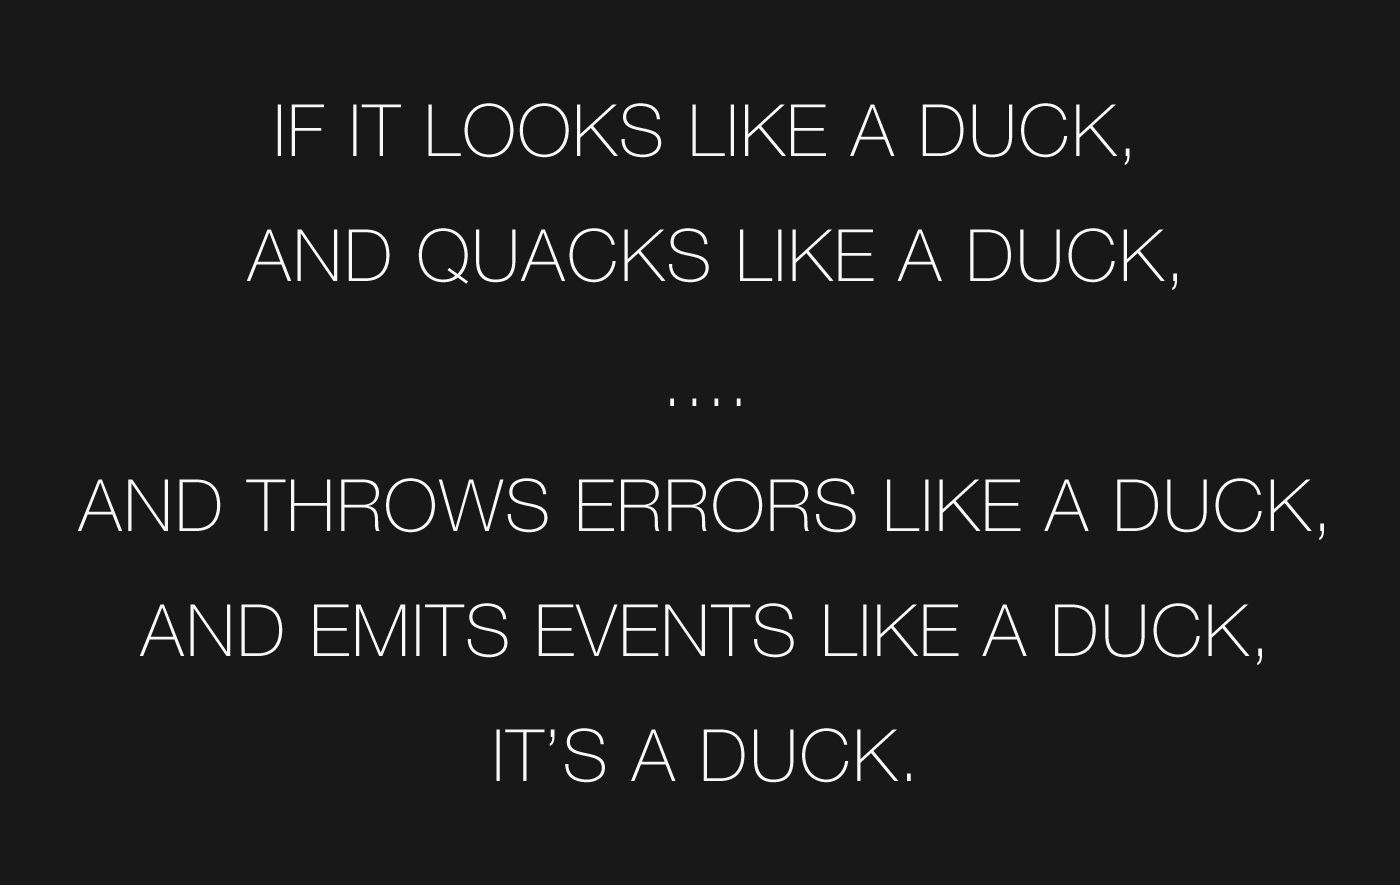 If it looks like a duck, and quacks like a duck, and throws errors like a duck, and emits events like a duck, it's a duck.